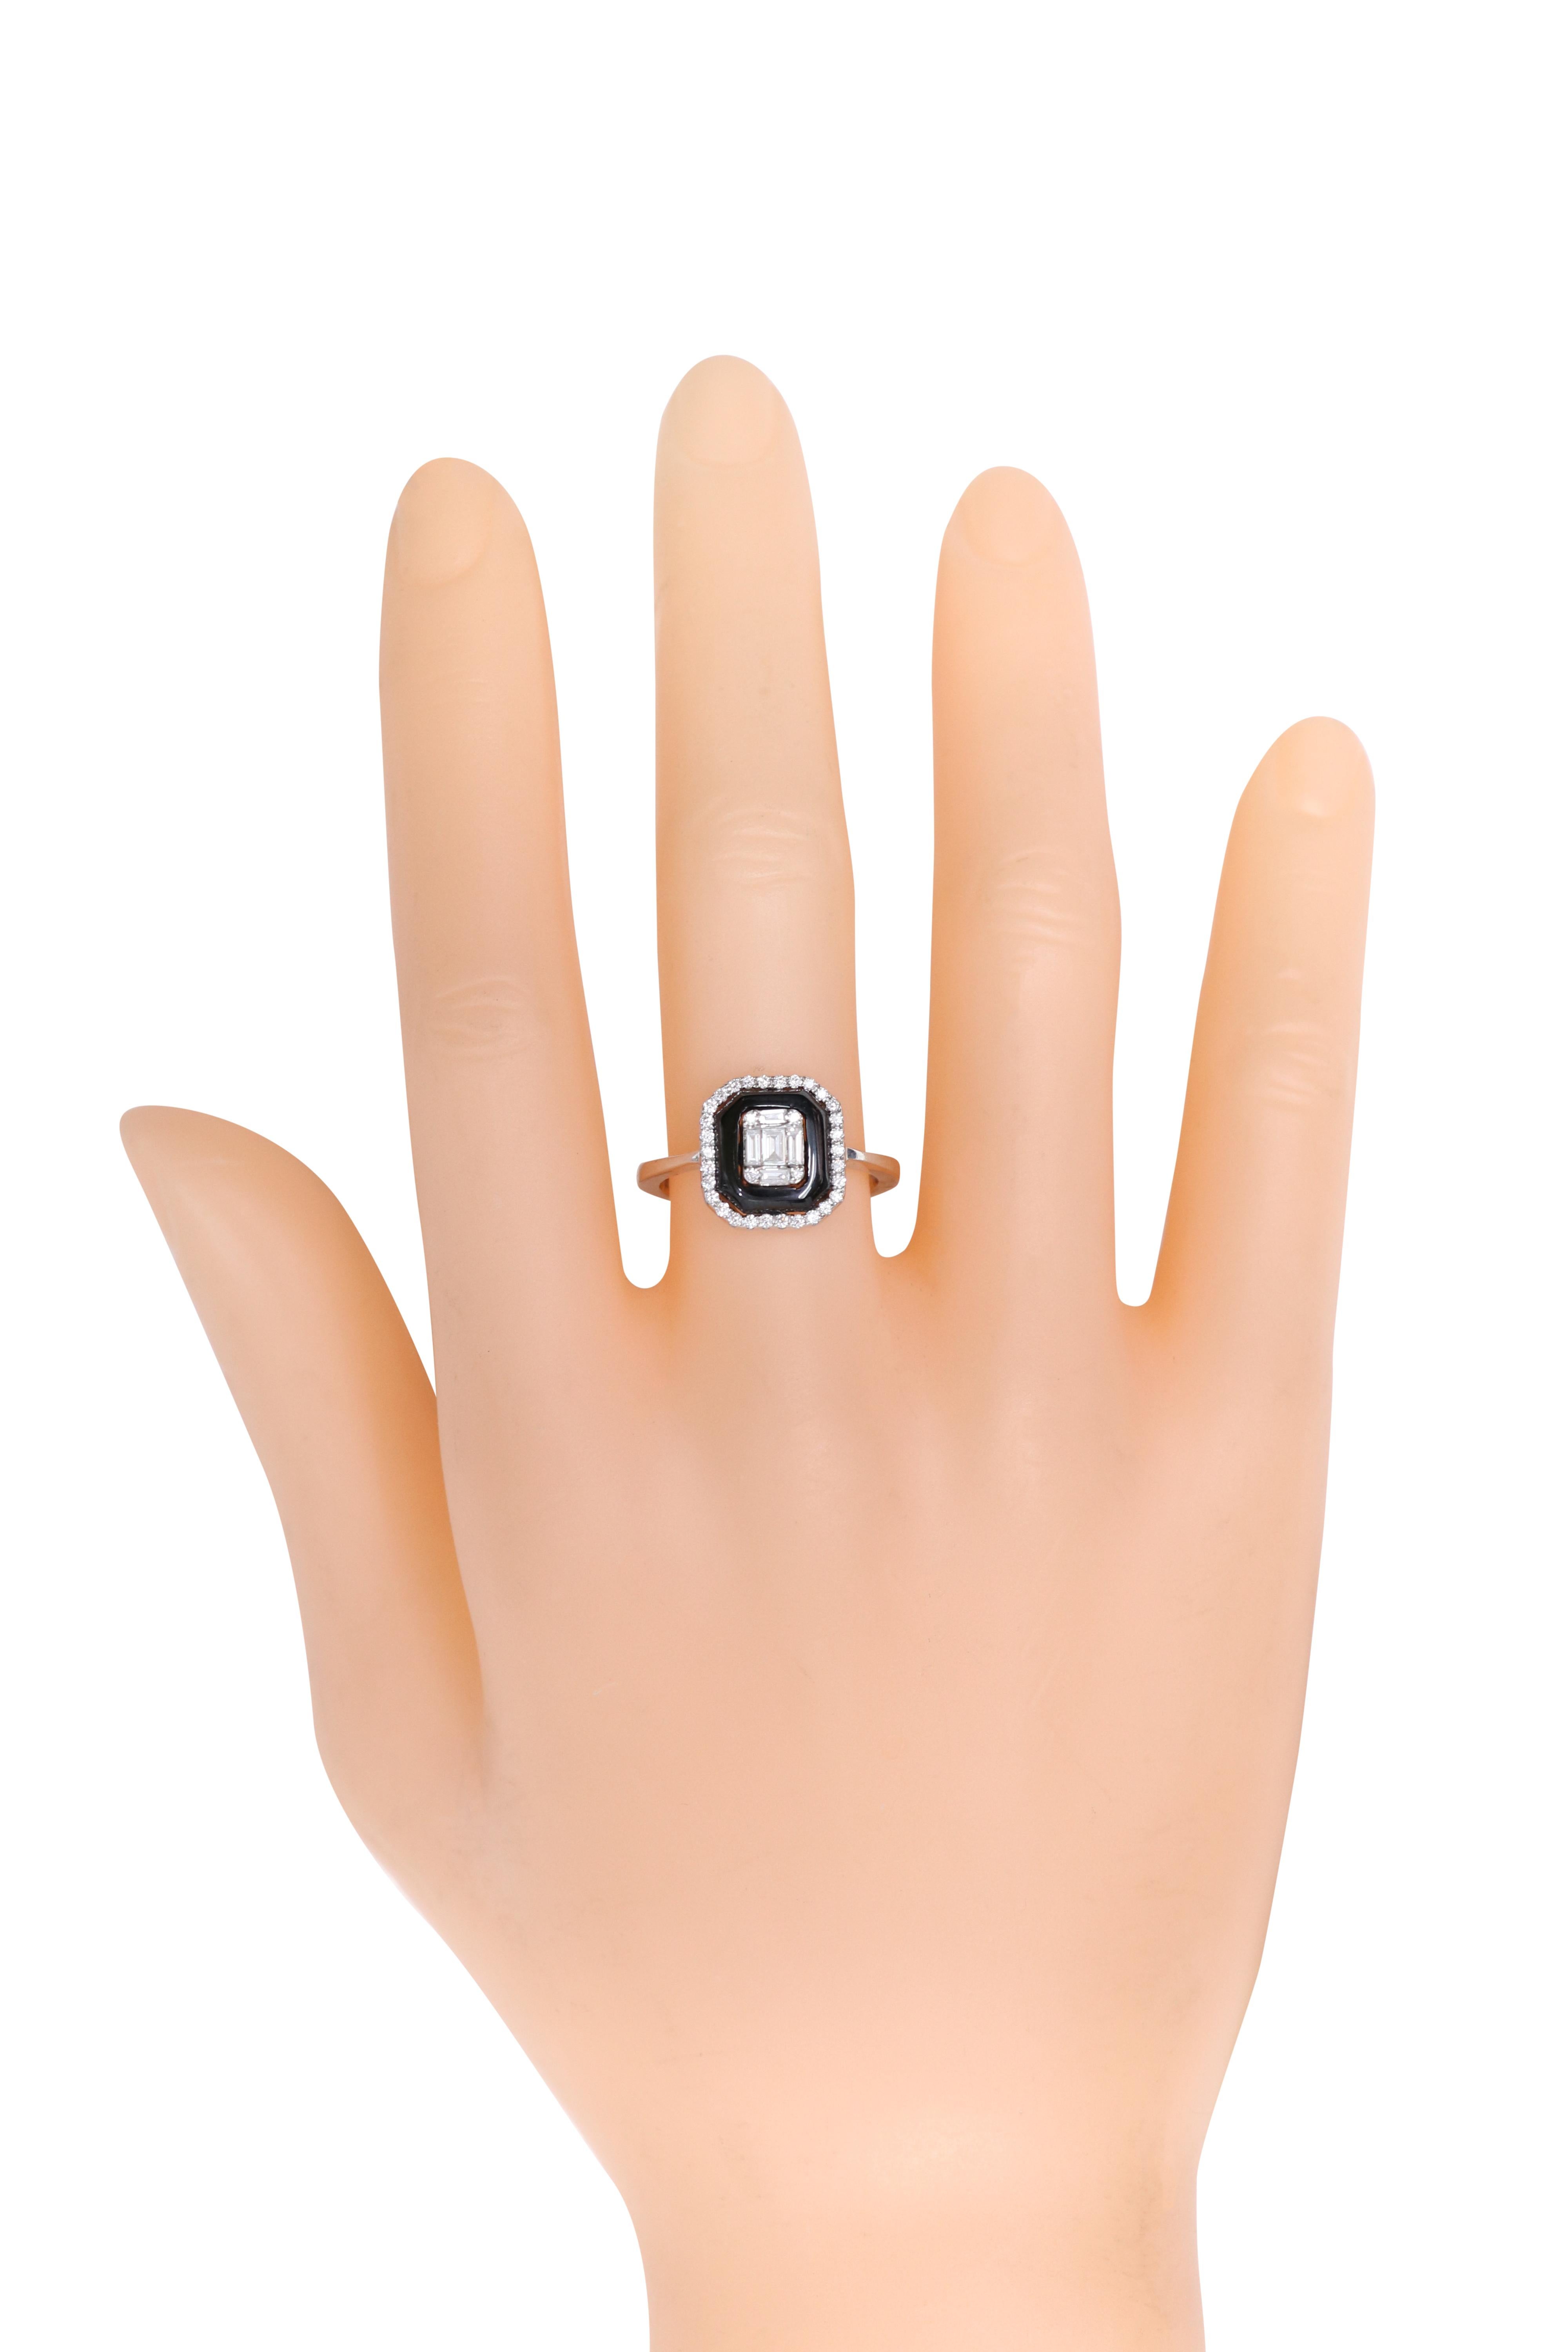 18 Karat White Gold Diamond and Black Onyx Fashion Ring

Brilliance and luster in collaboration with simplicity is what this gorgeous ring has to offer. This ring represents an essence of unique style with its baguette cut and brilliant cut diamond